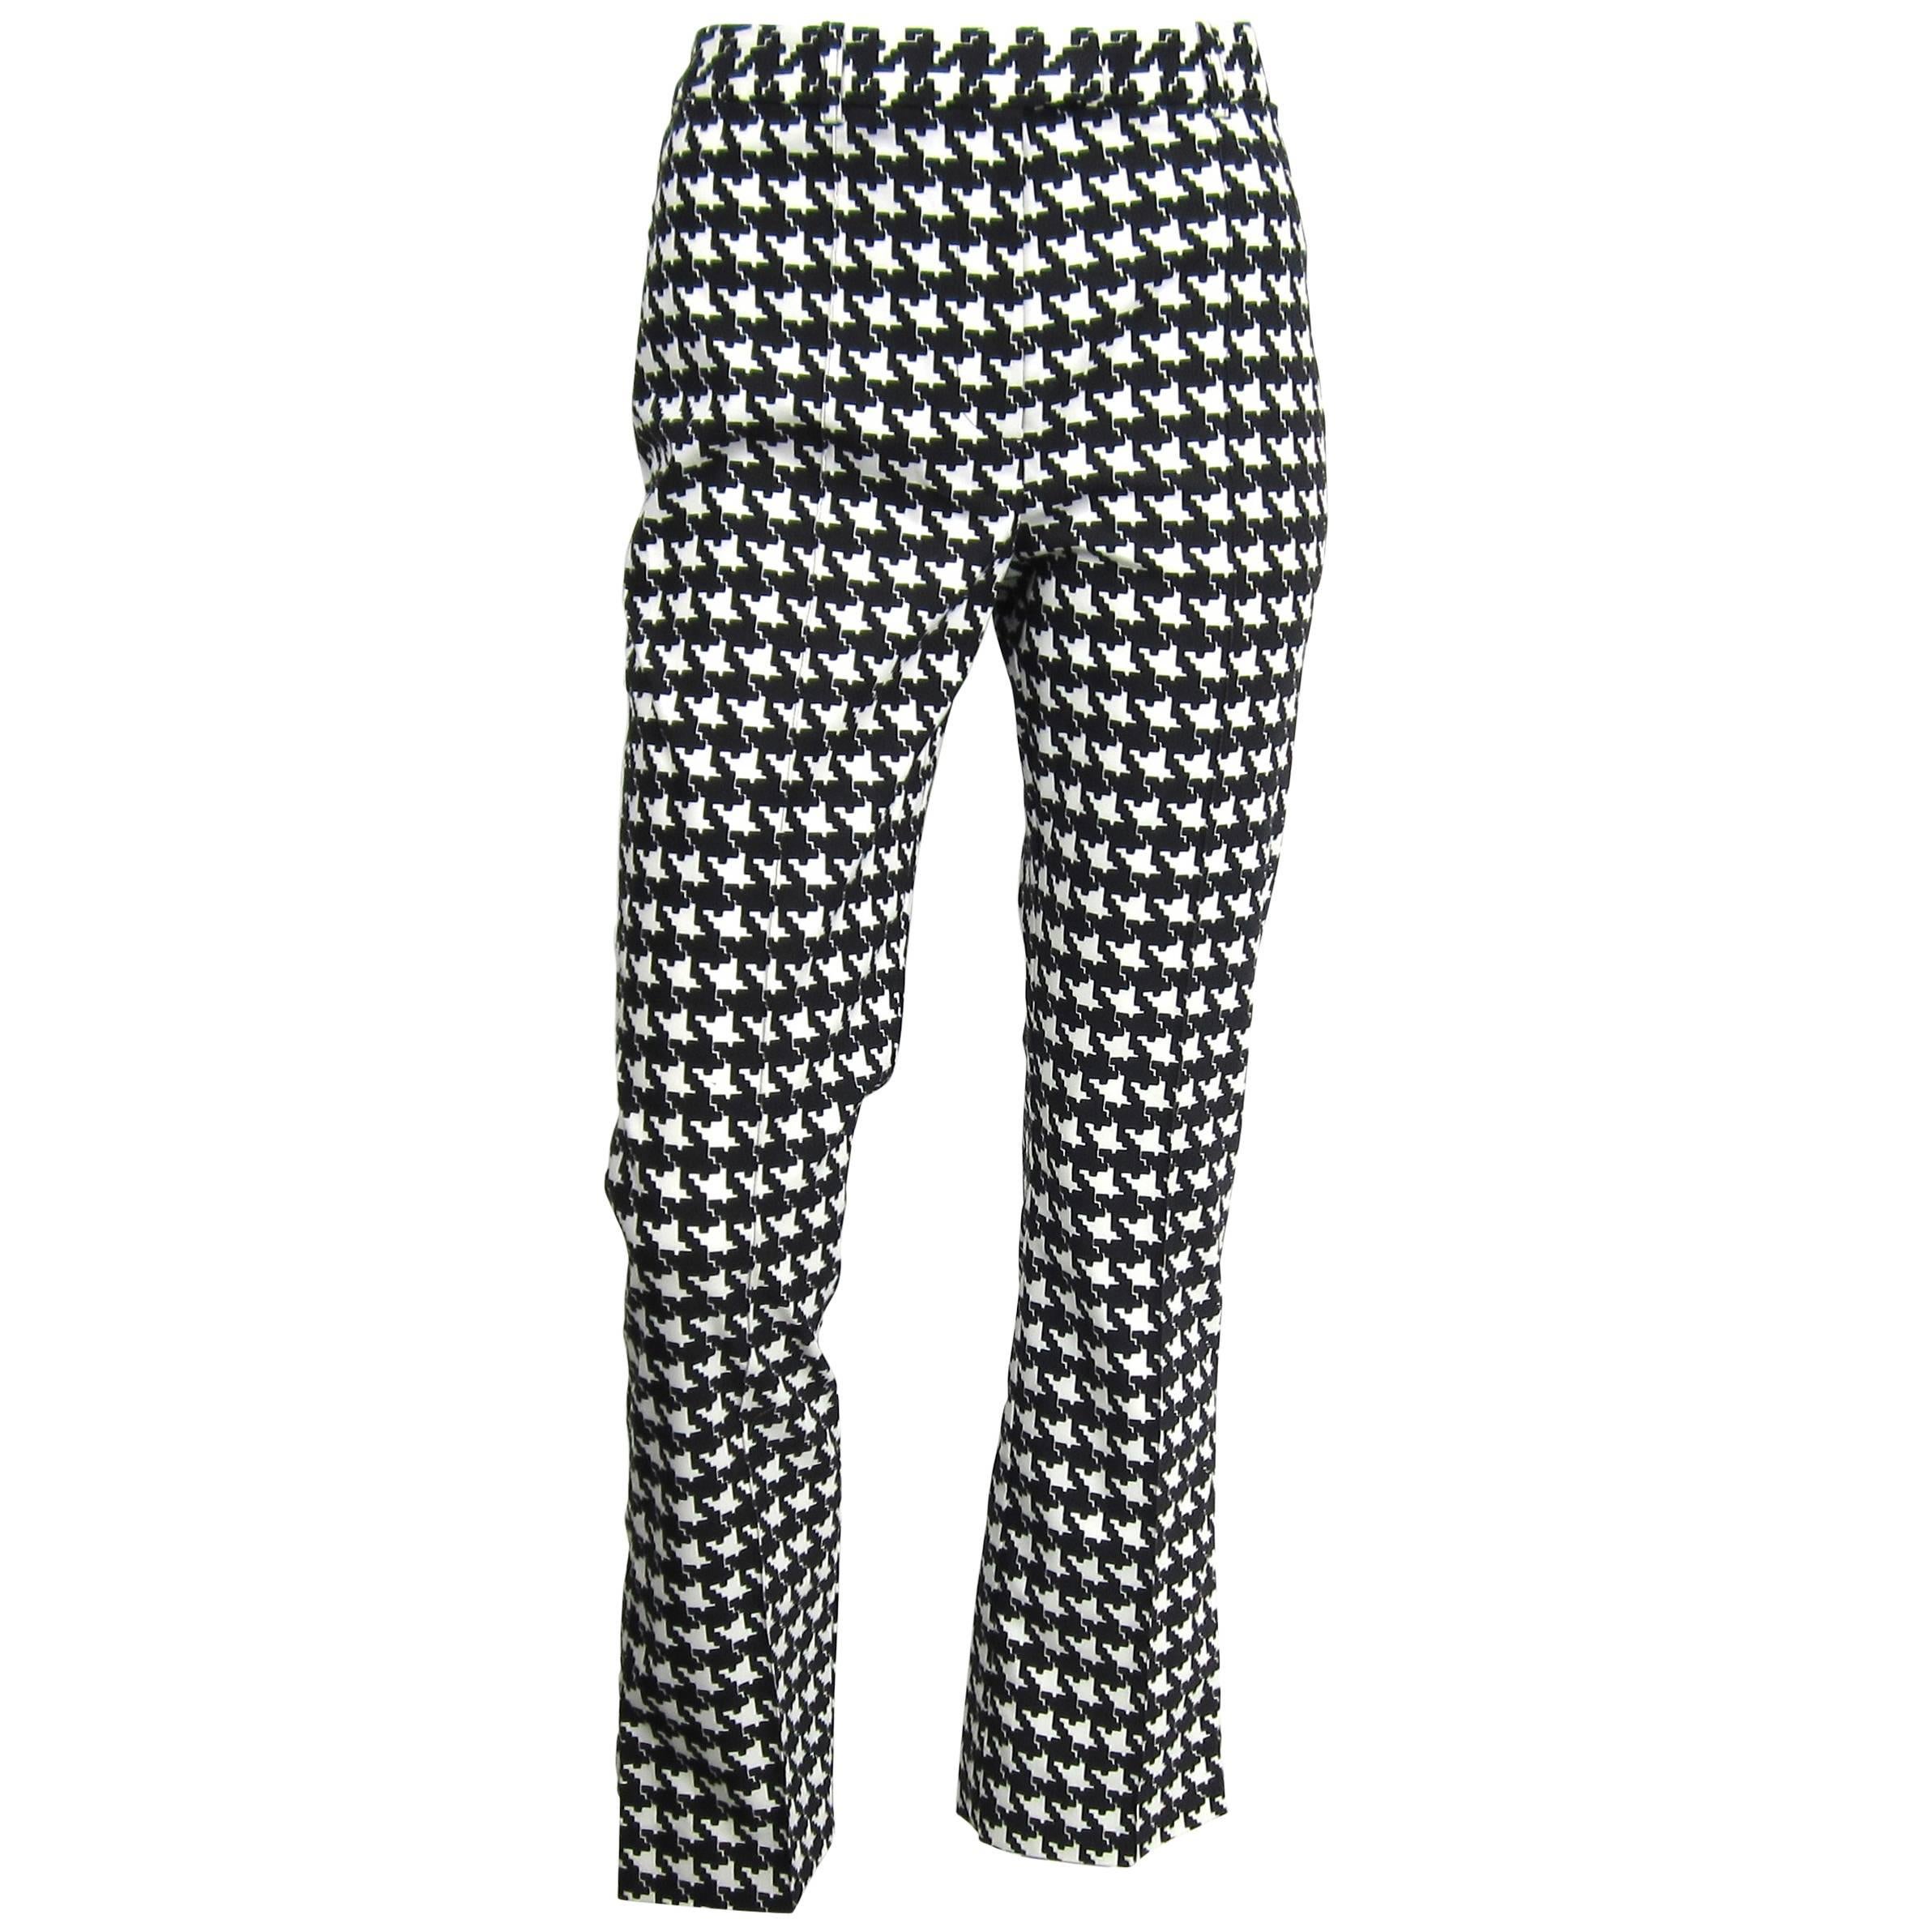 1990s John Galliano Hounds tooth Black & White Crop Pants 